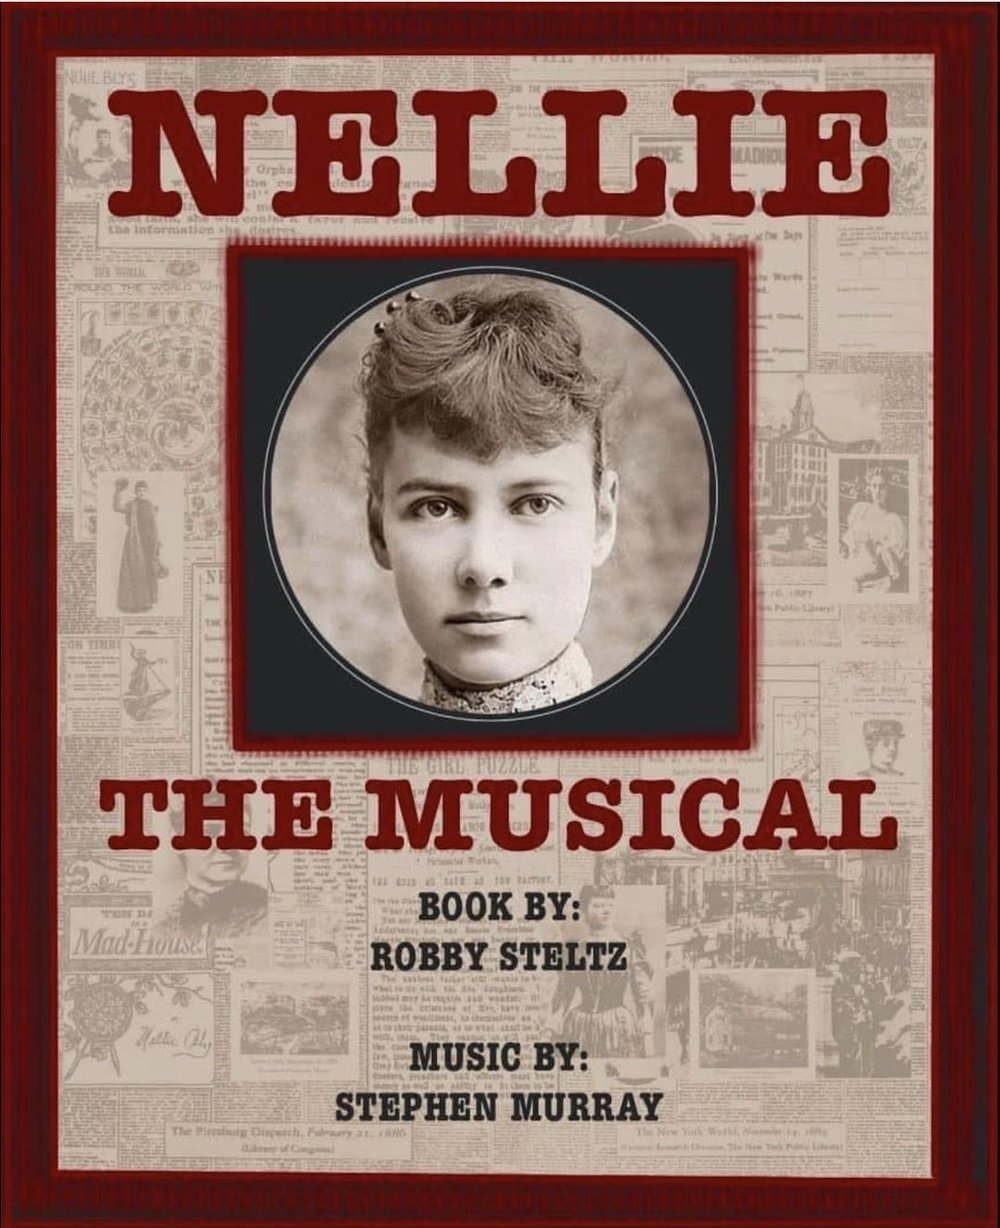 "Nellie the Musical" - by Robby Steltz and Stephen Murray - 4th Wall Stage Company (Worcester, MA.)